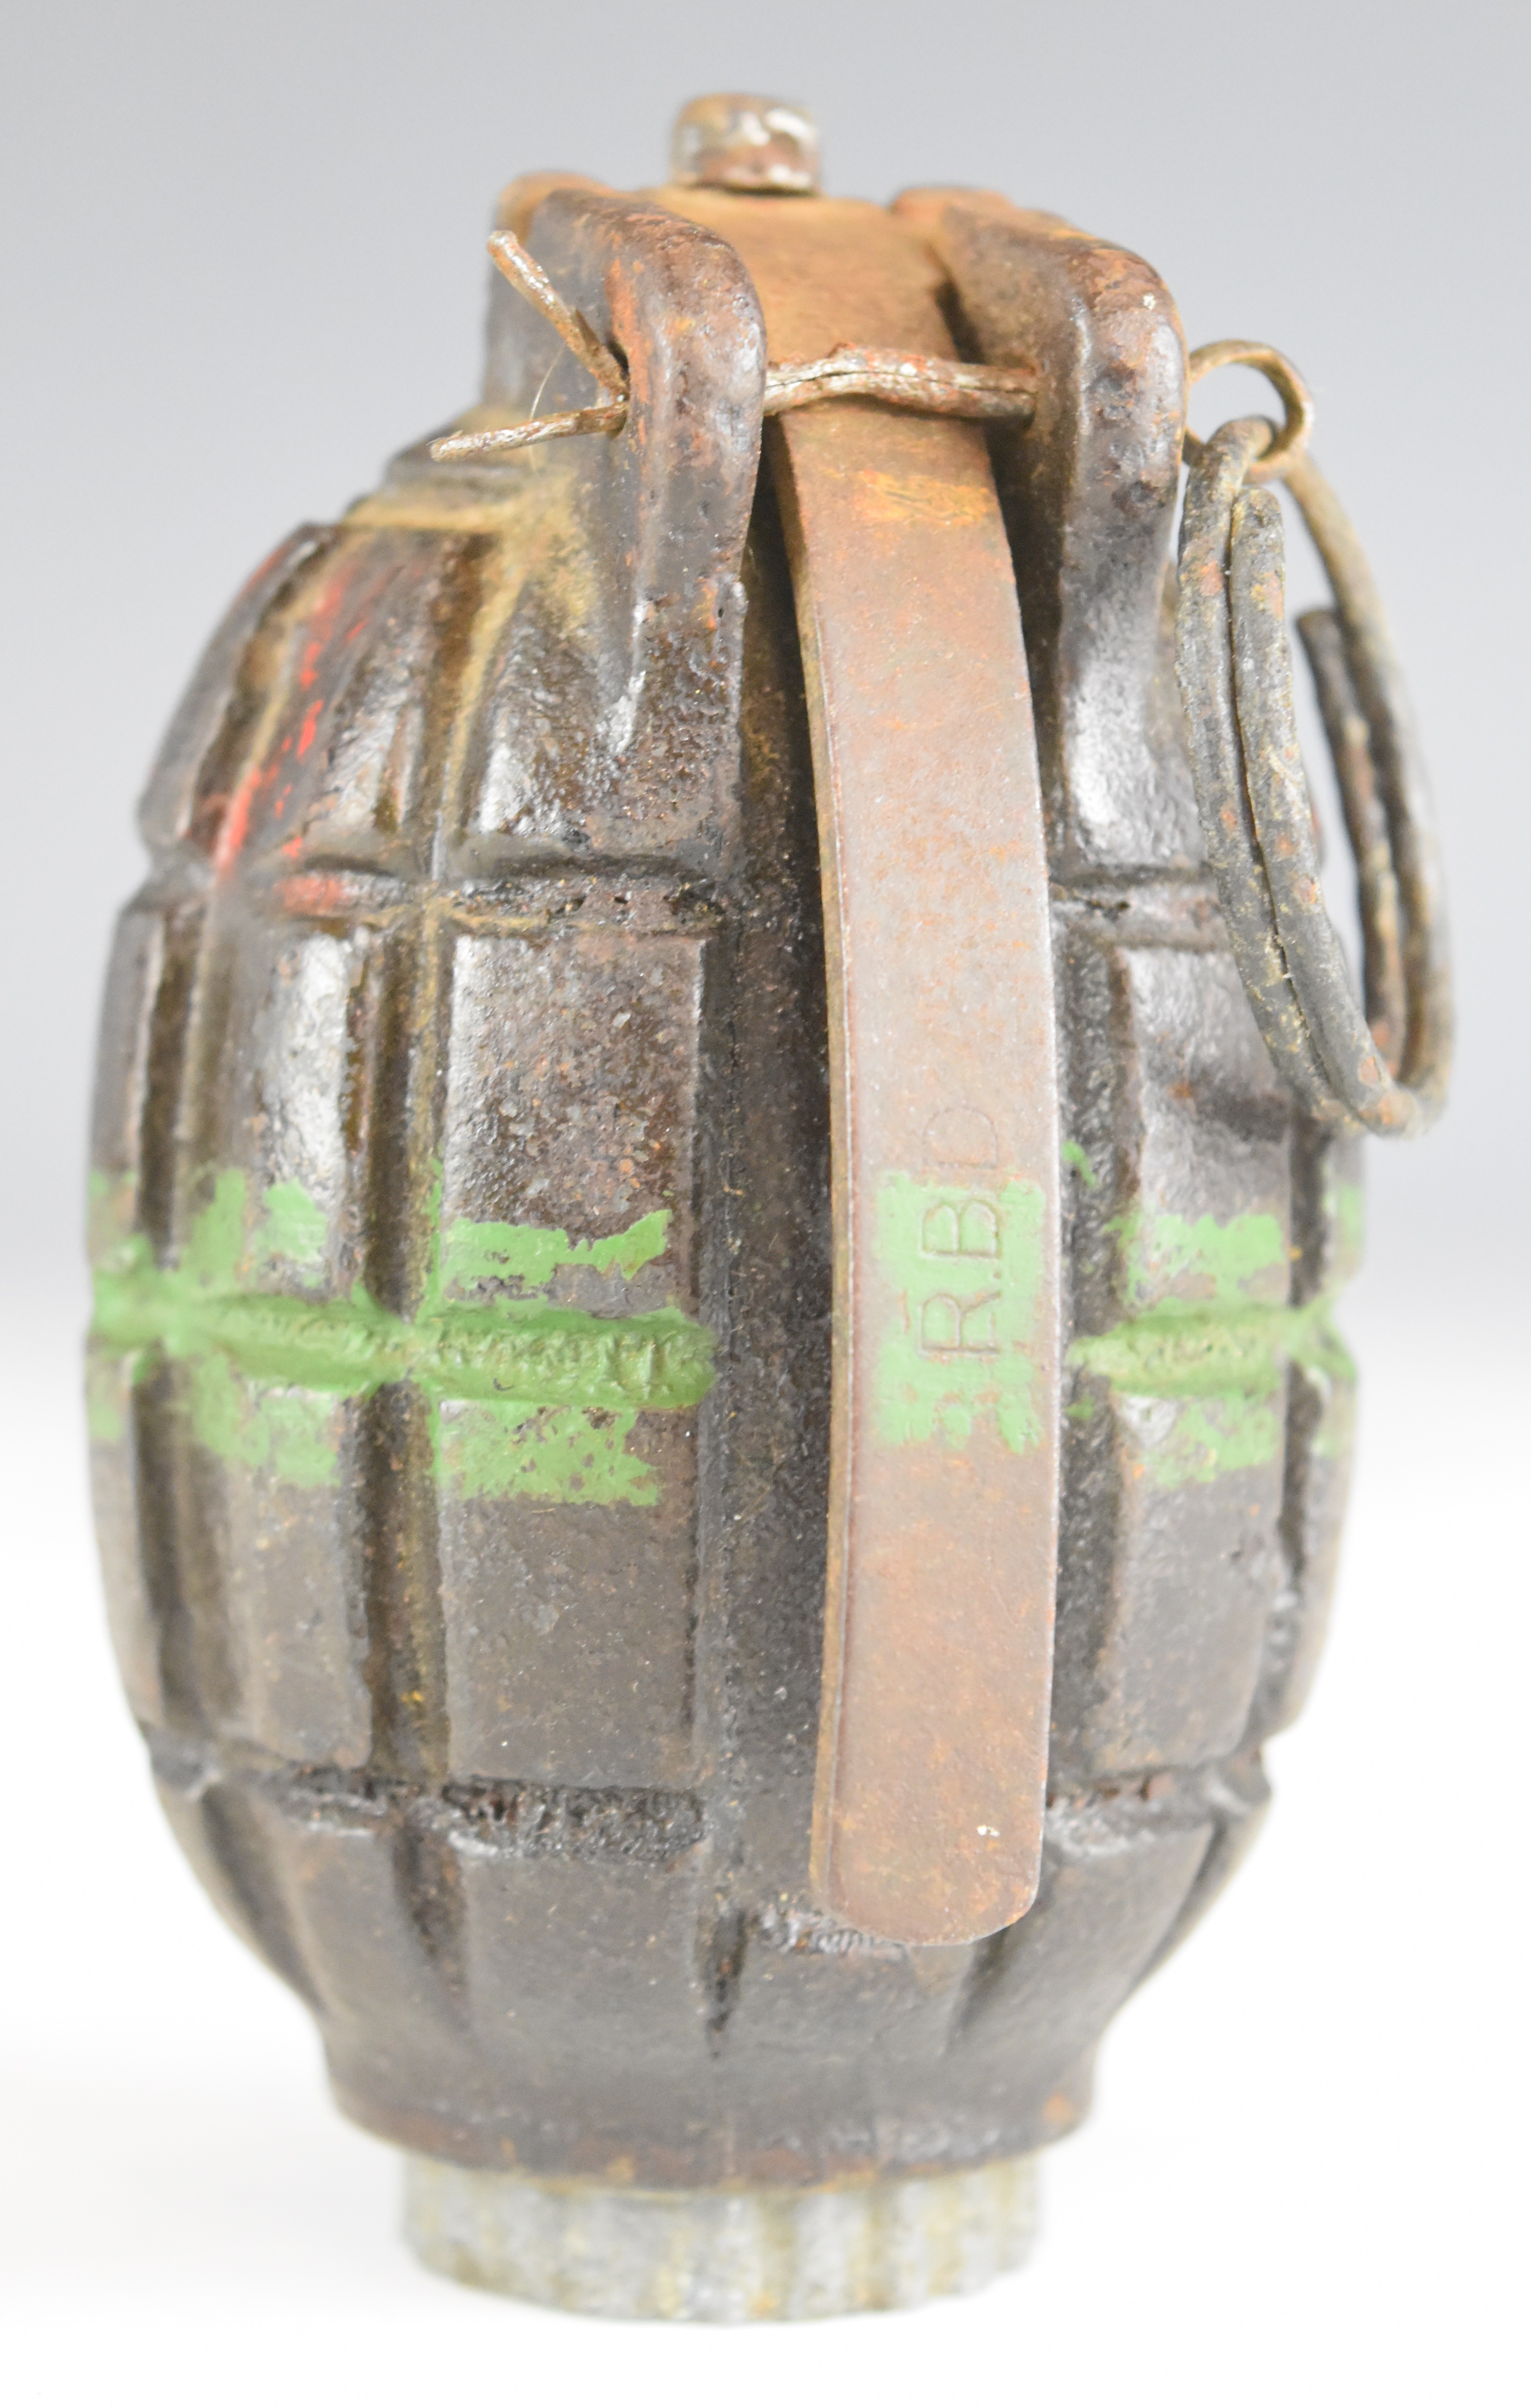 British WW2 inert Mills bomb / grenade stamped No 6 MZ MK I and SRD to alloy screw in base - Image 5 of 10